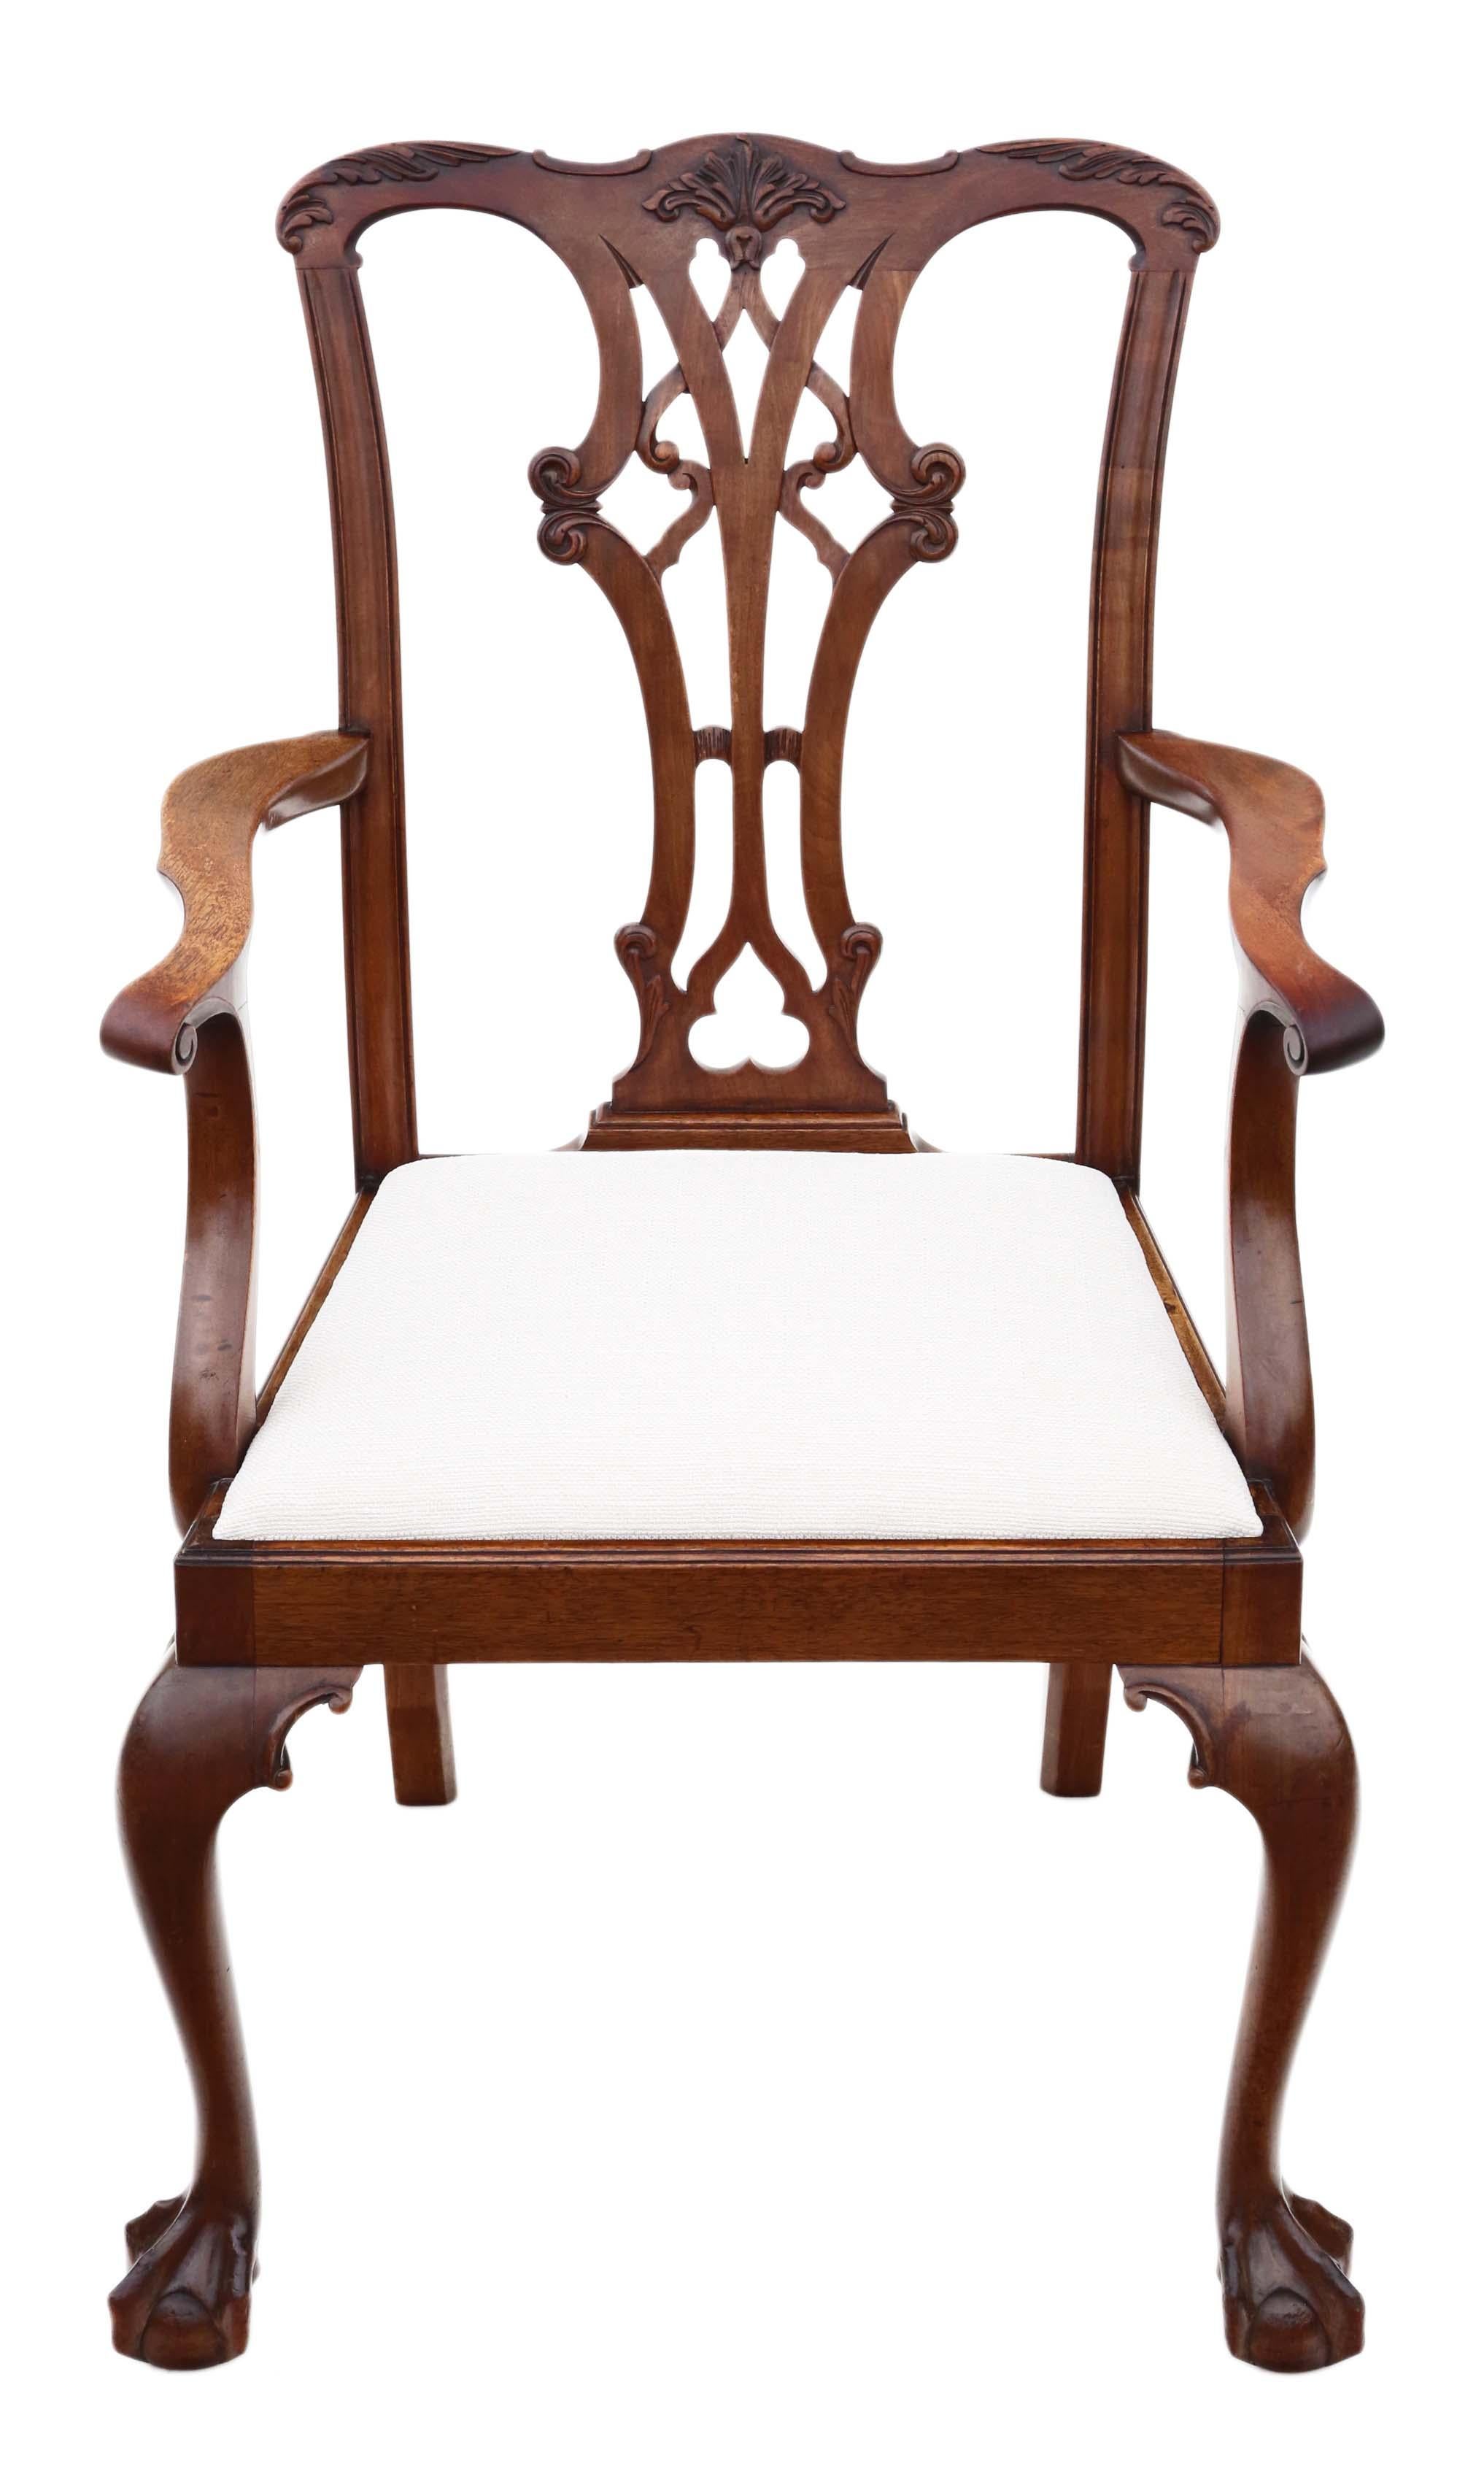 Early 20th Century Georgian Revival Mahogany Dining Chairs: Set of 8 (6+2), Antique Quality, C1910 For Sale